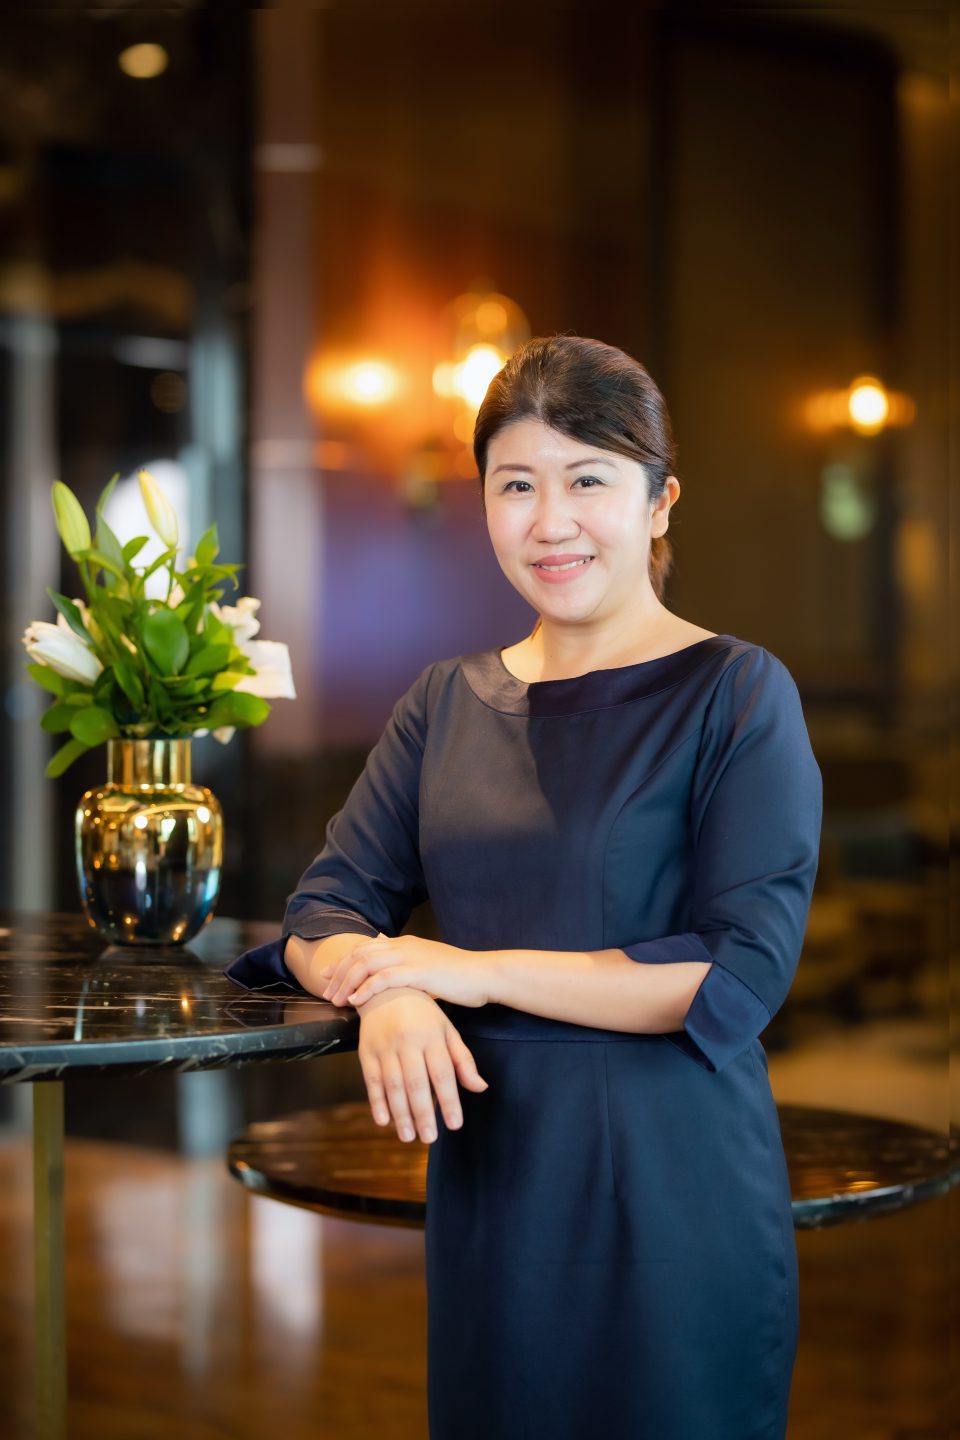 Audrey Lim, the Hotel Manager at The Ritz-Carlton Jakarta, Pacific Place